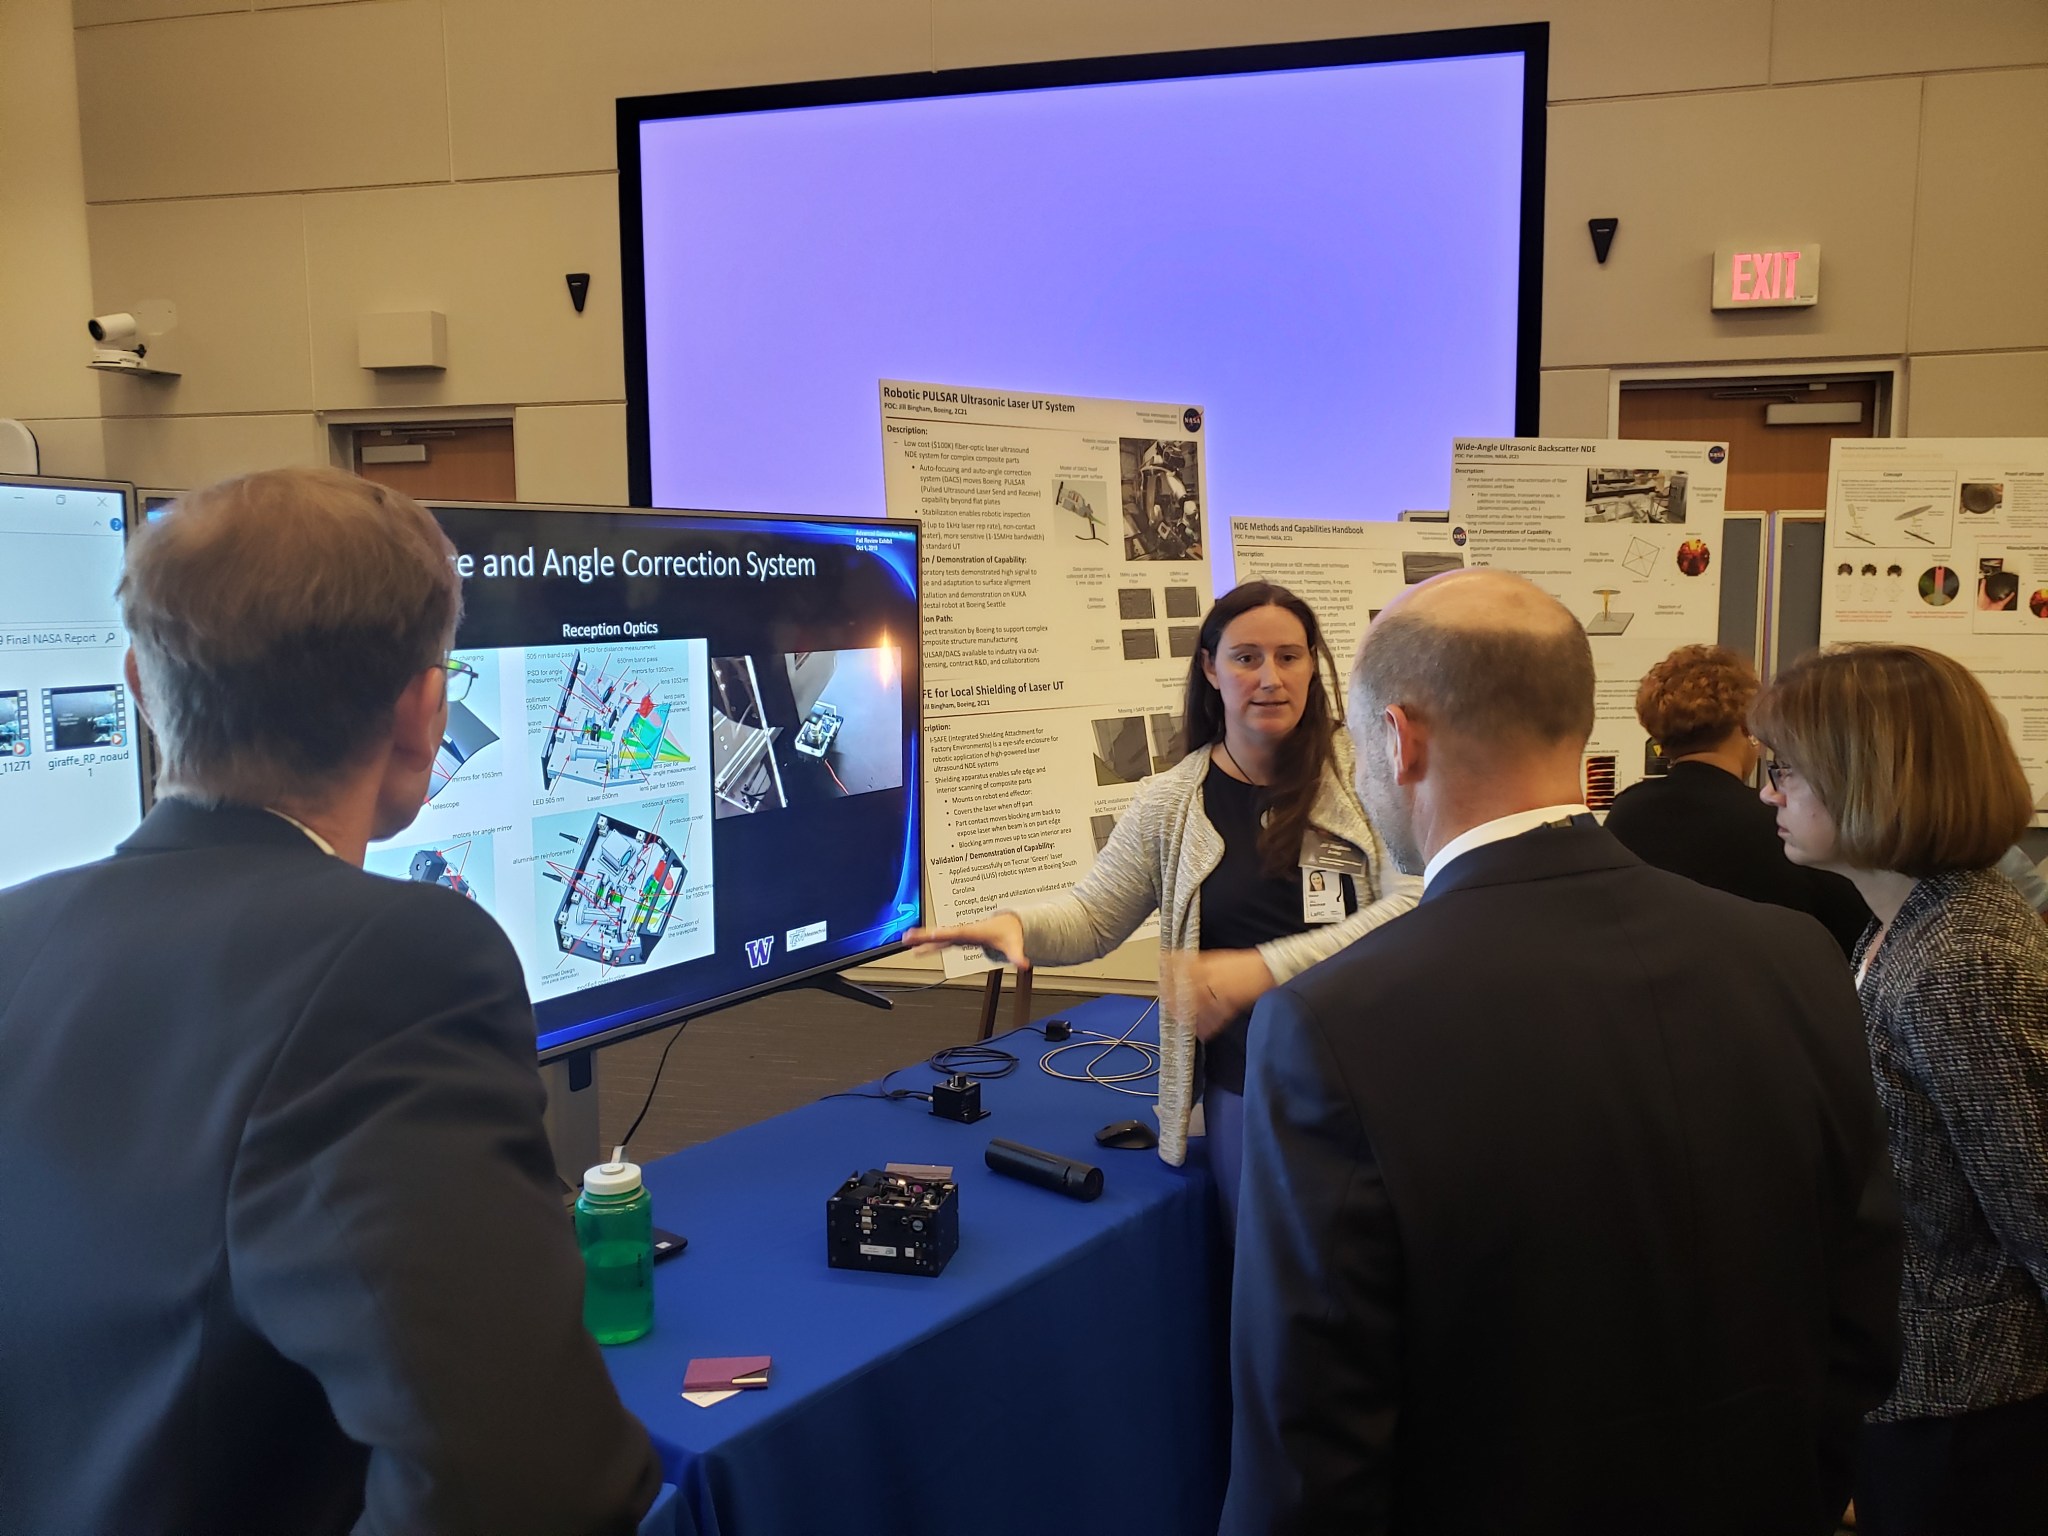 A female NASA researcher explaining composites to a group of people.